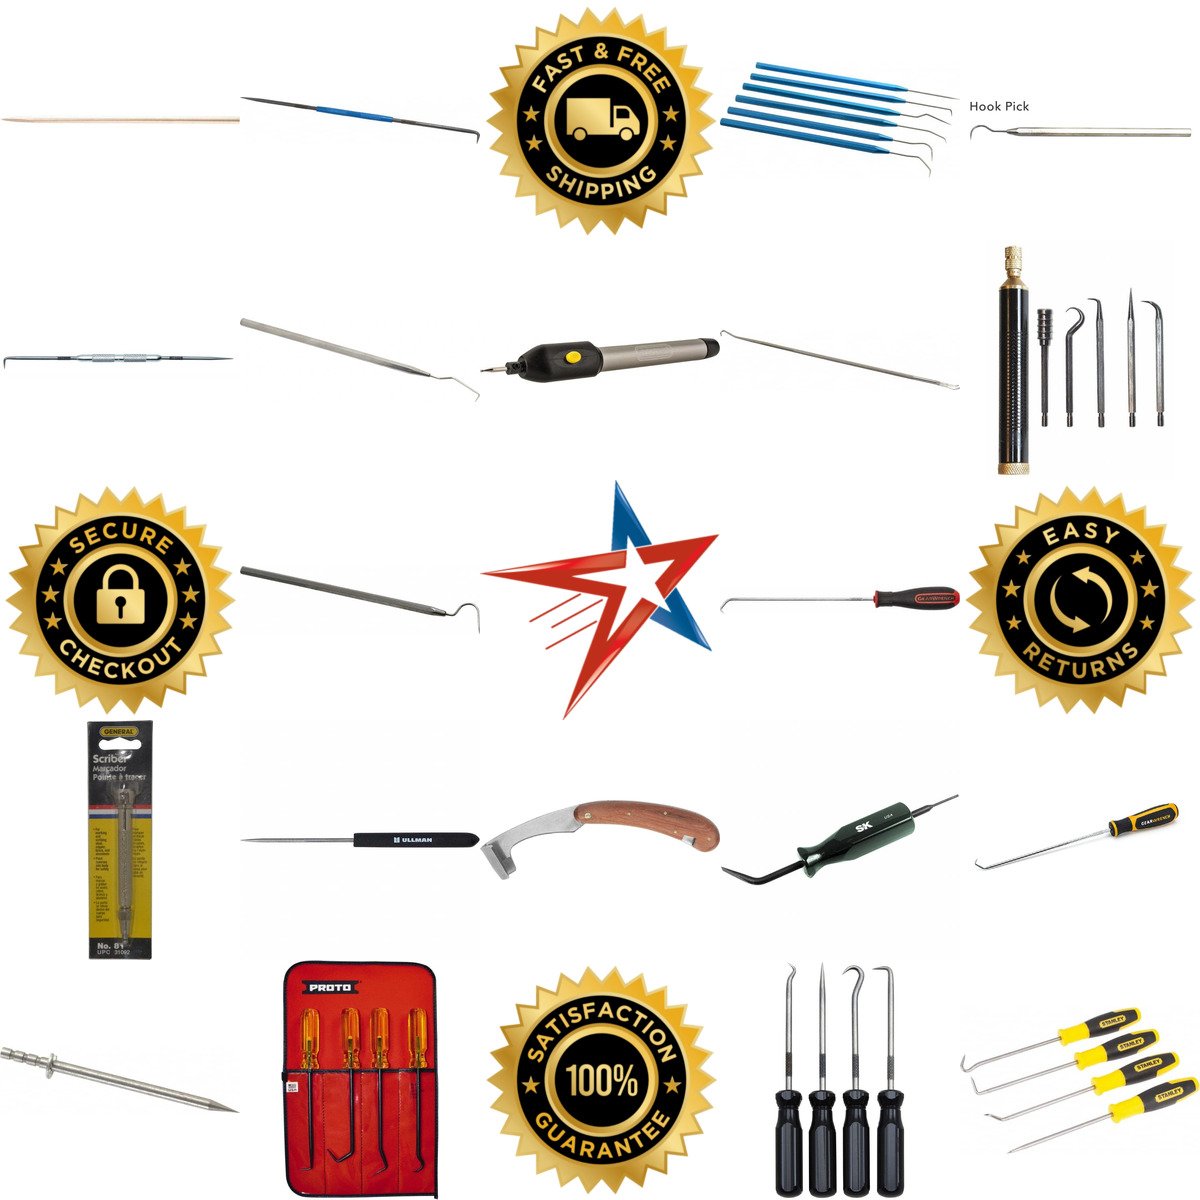 A selection of Scribes and Awls products on GoVets